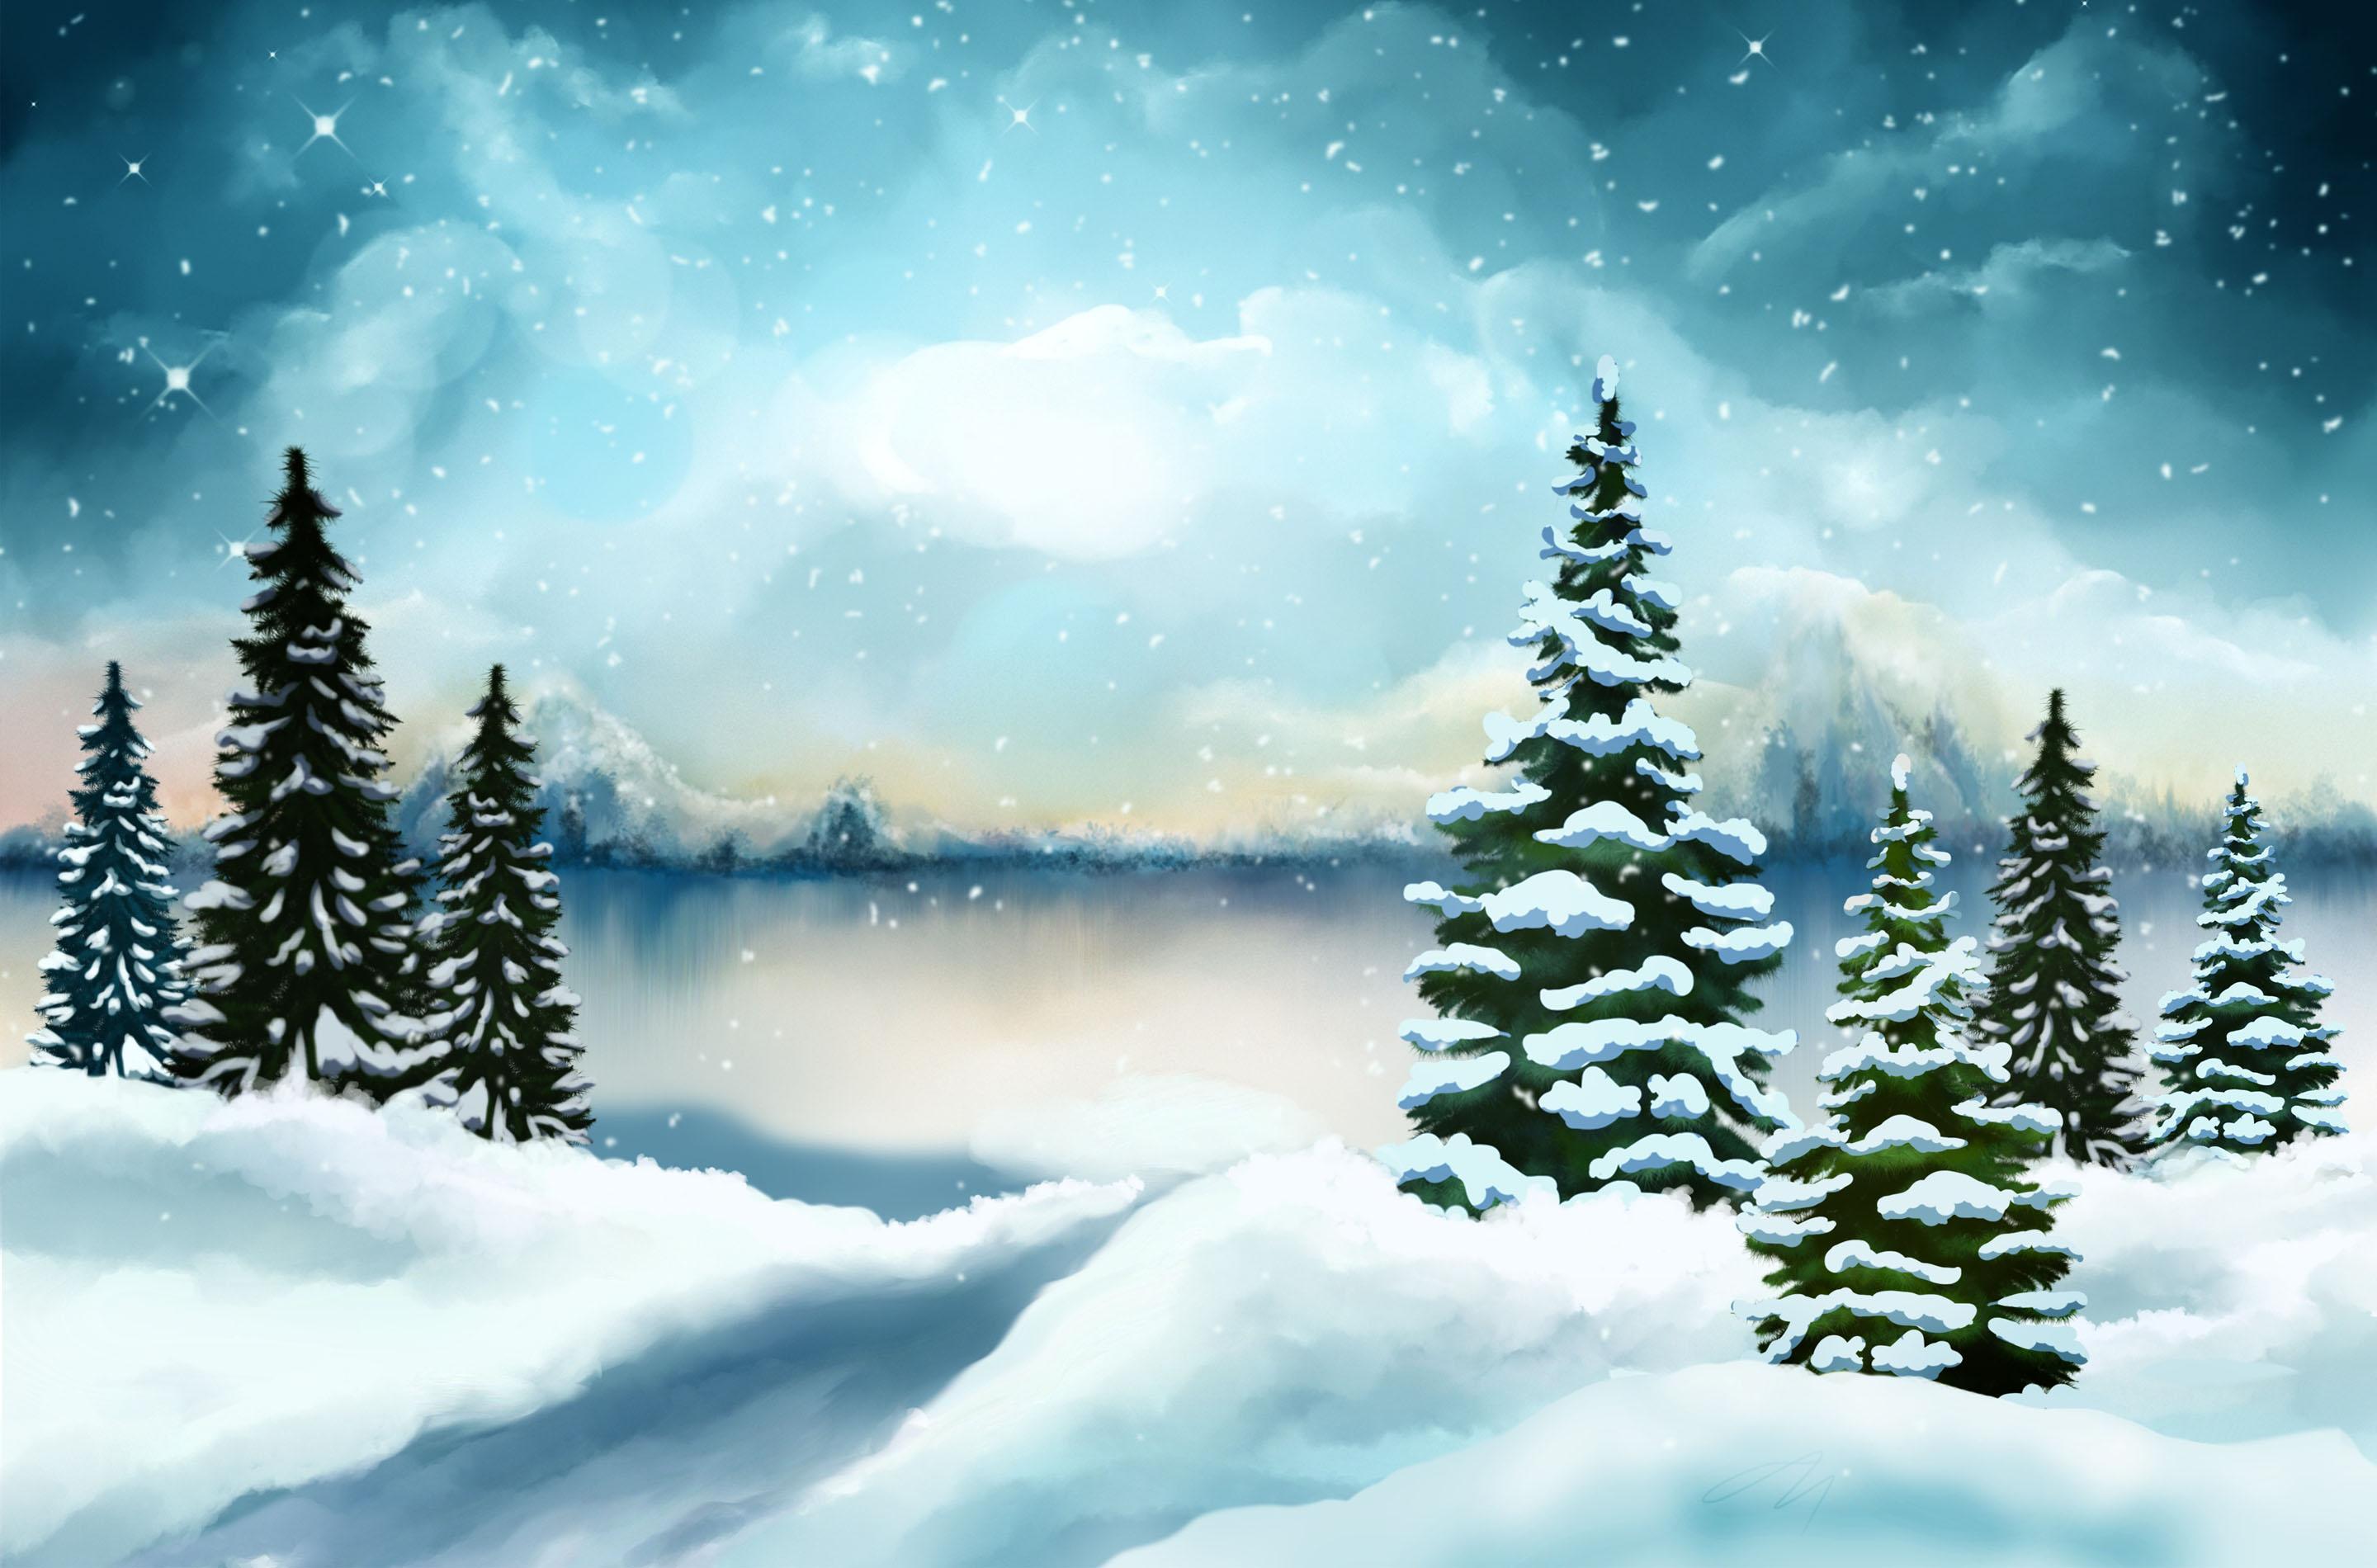 Snowy Winter for Android - APK Download